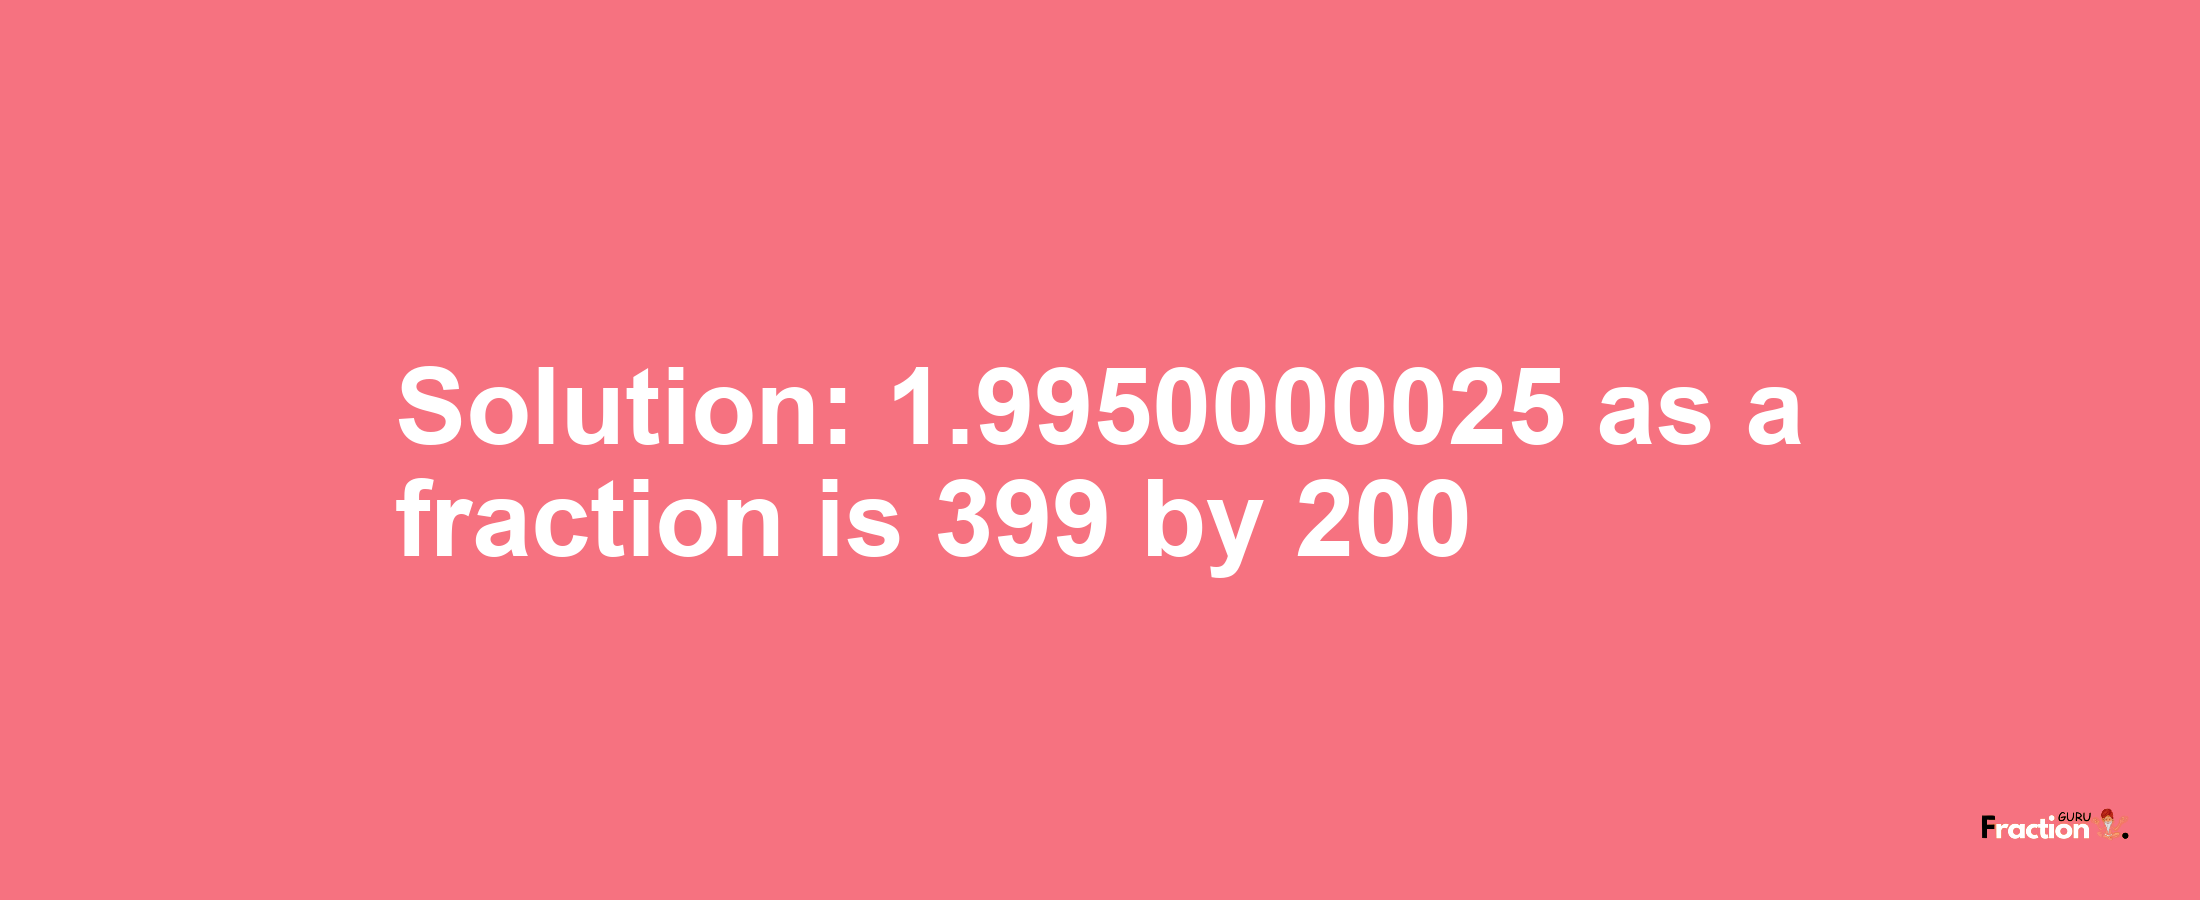 Solution:1.9950000025 as a fraction is 399/200